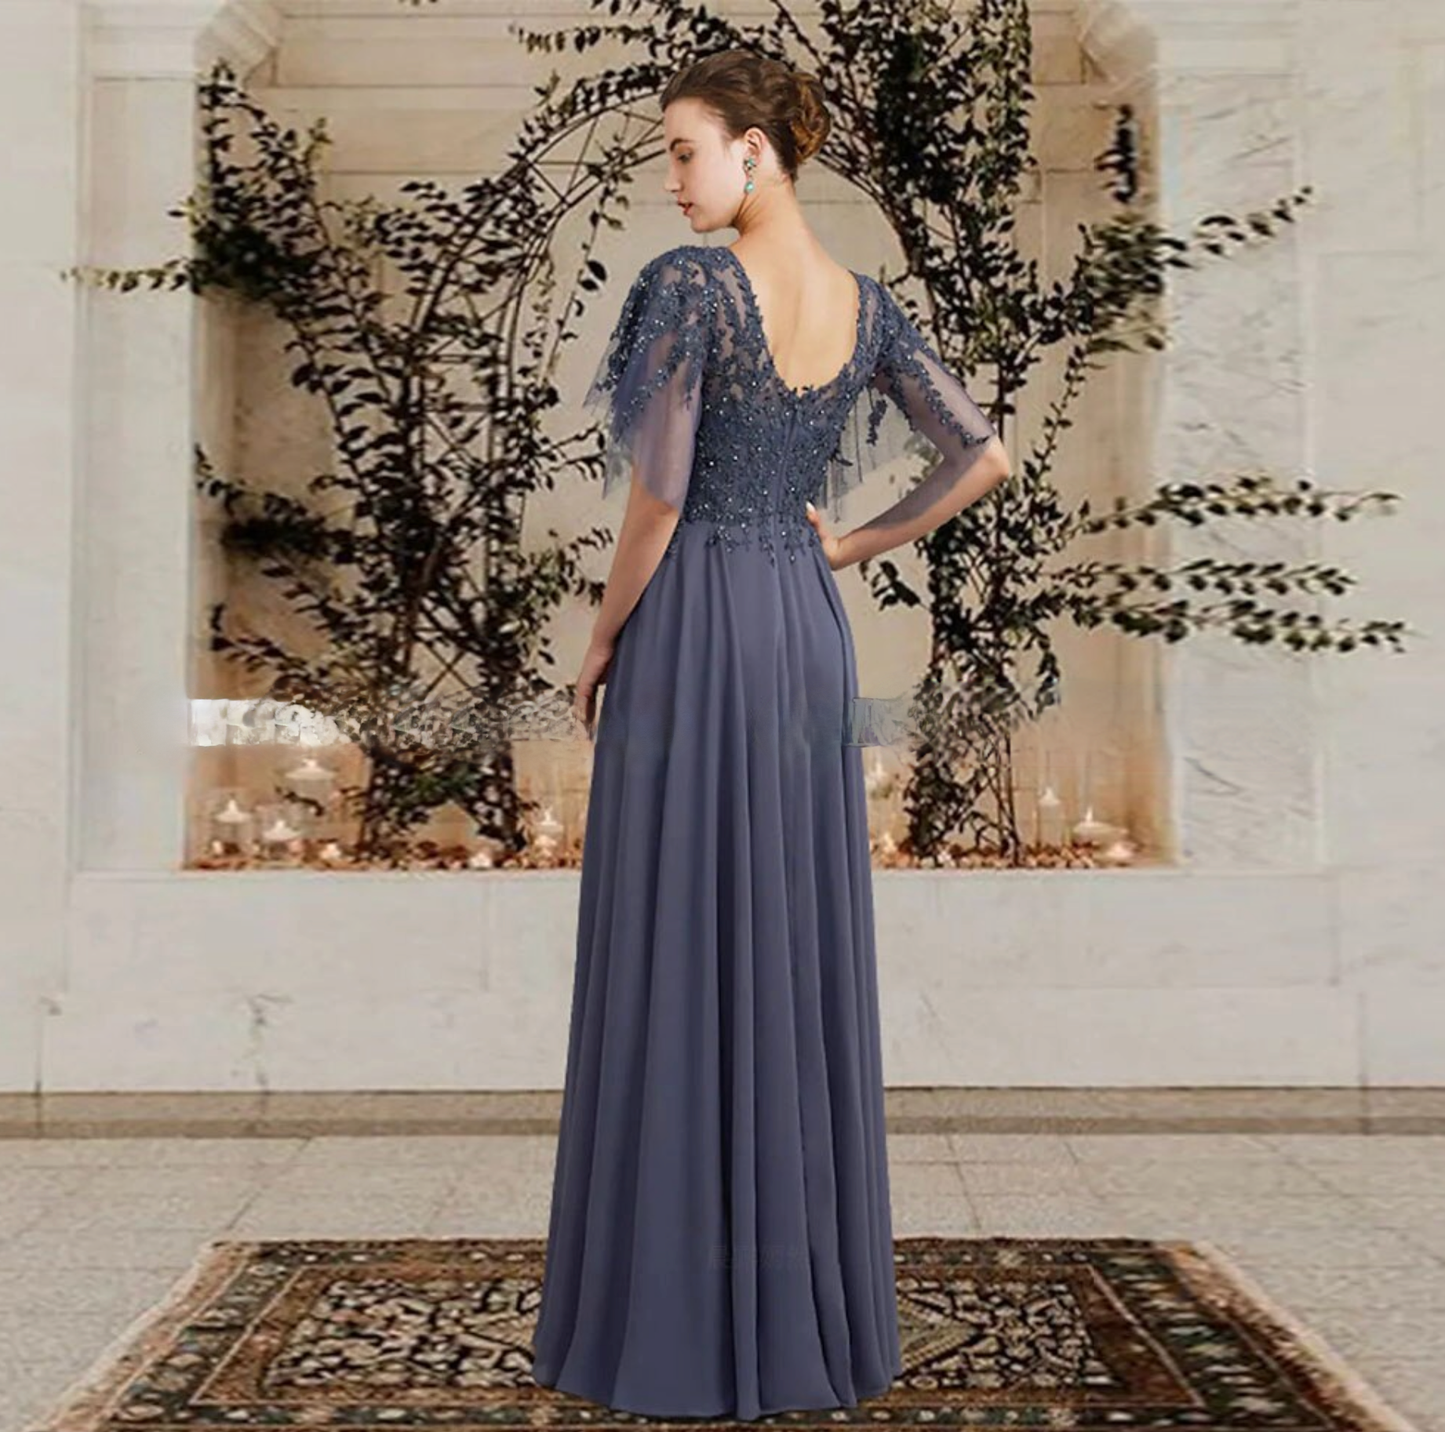 Long Mother of the Bride Chiffon Dress Elegant Wedding Guest Gown